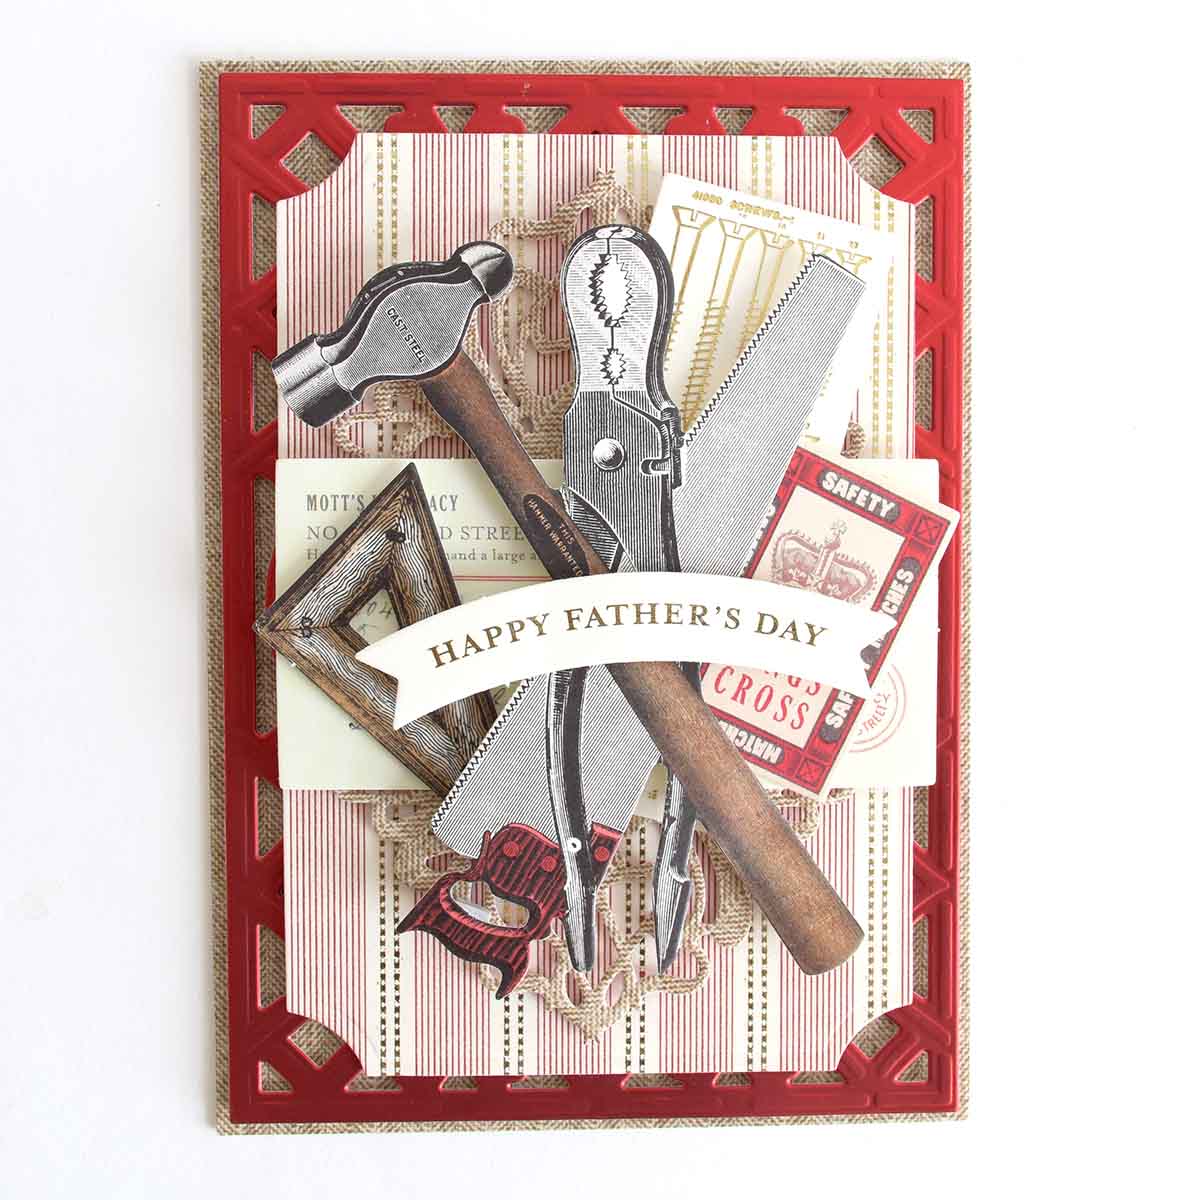 a father's day card with tools and a ribbon.